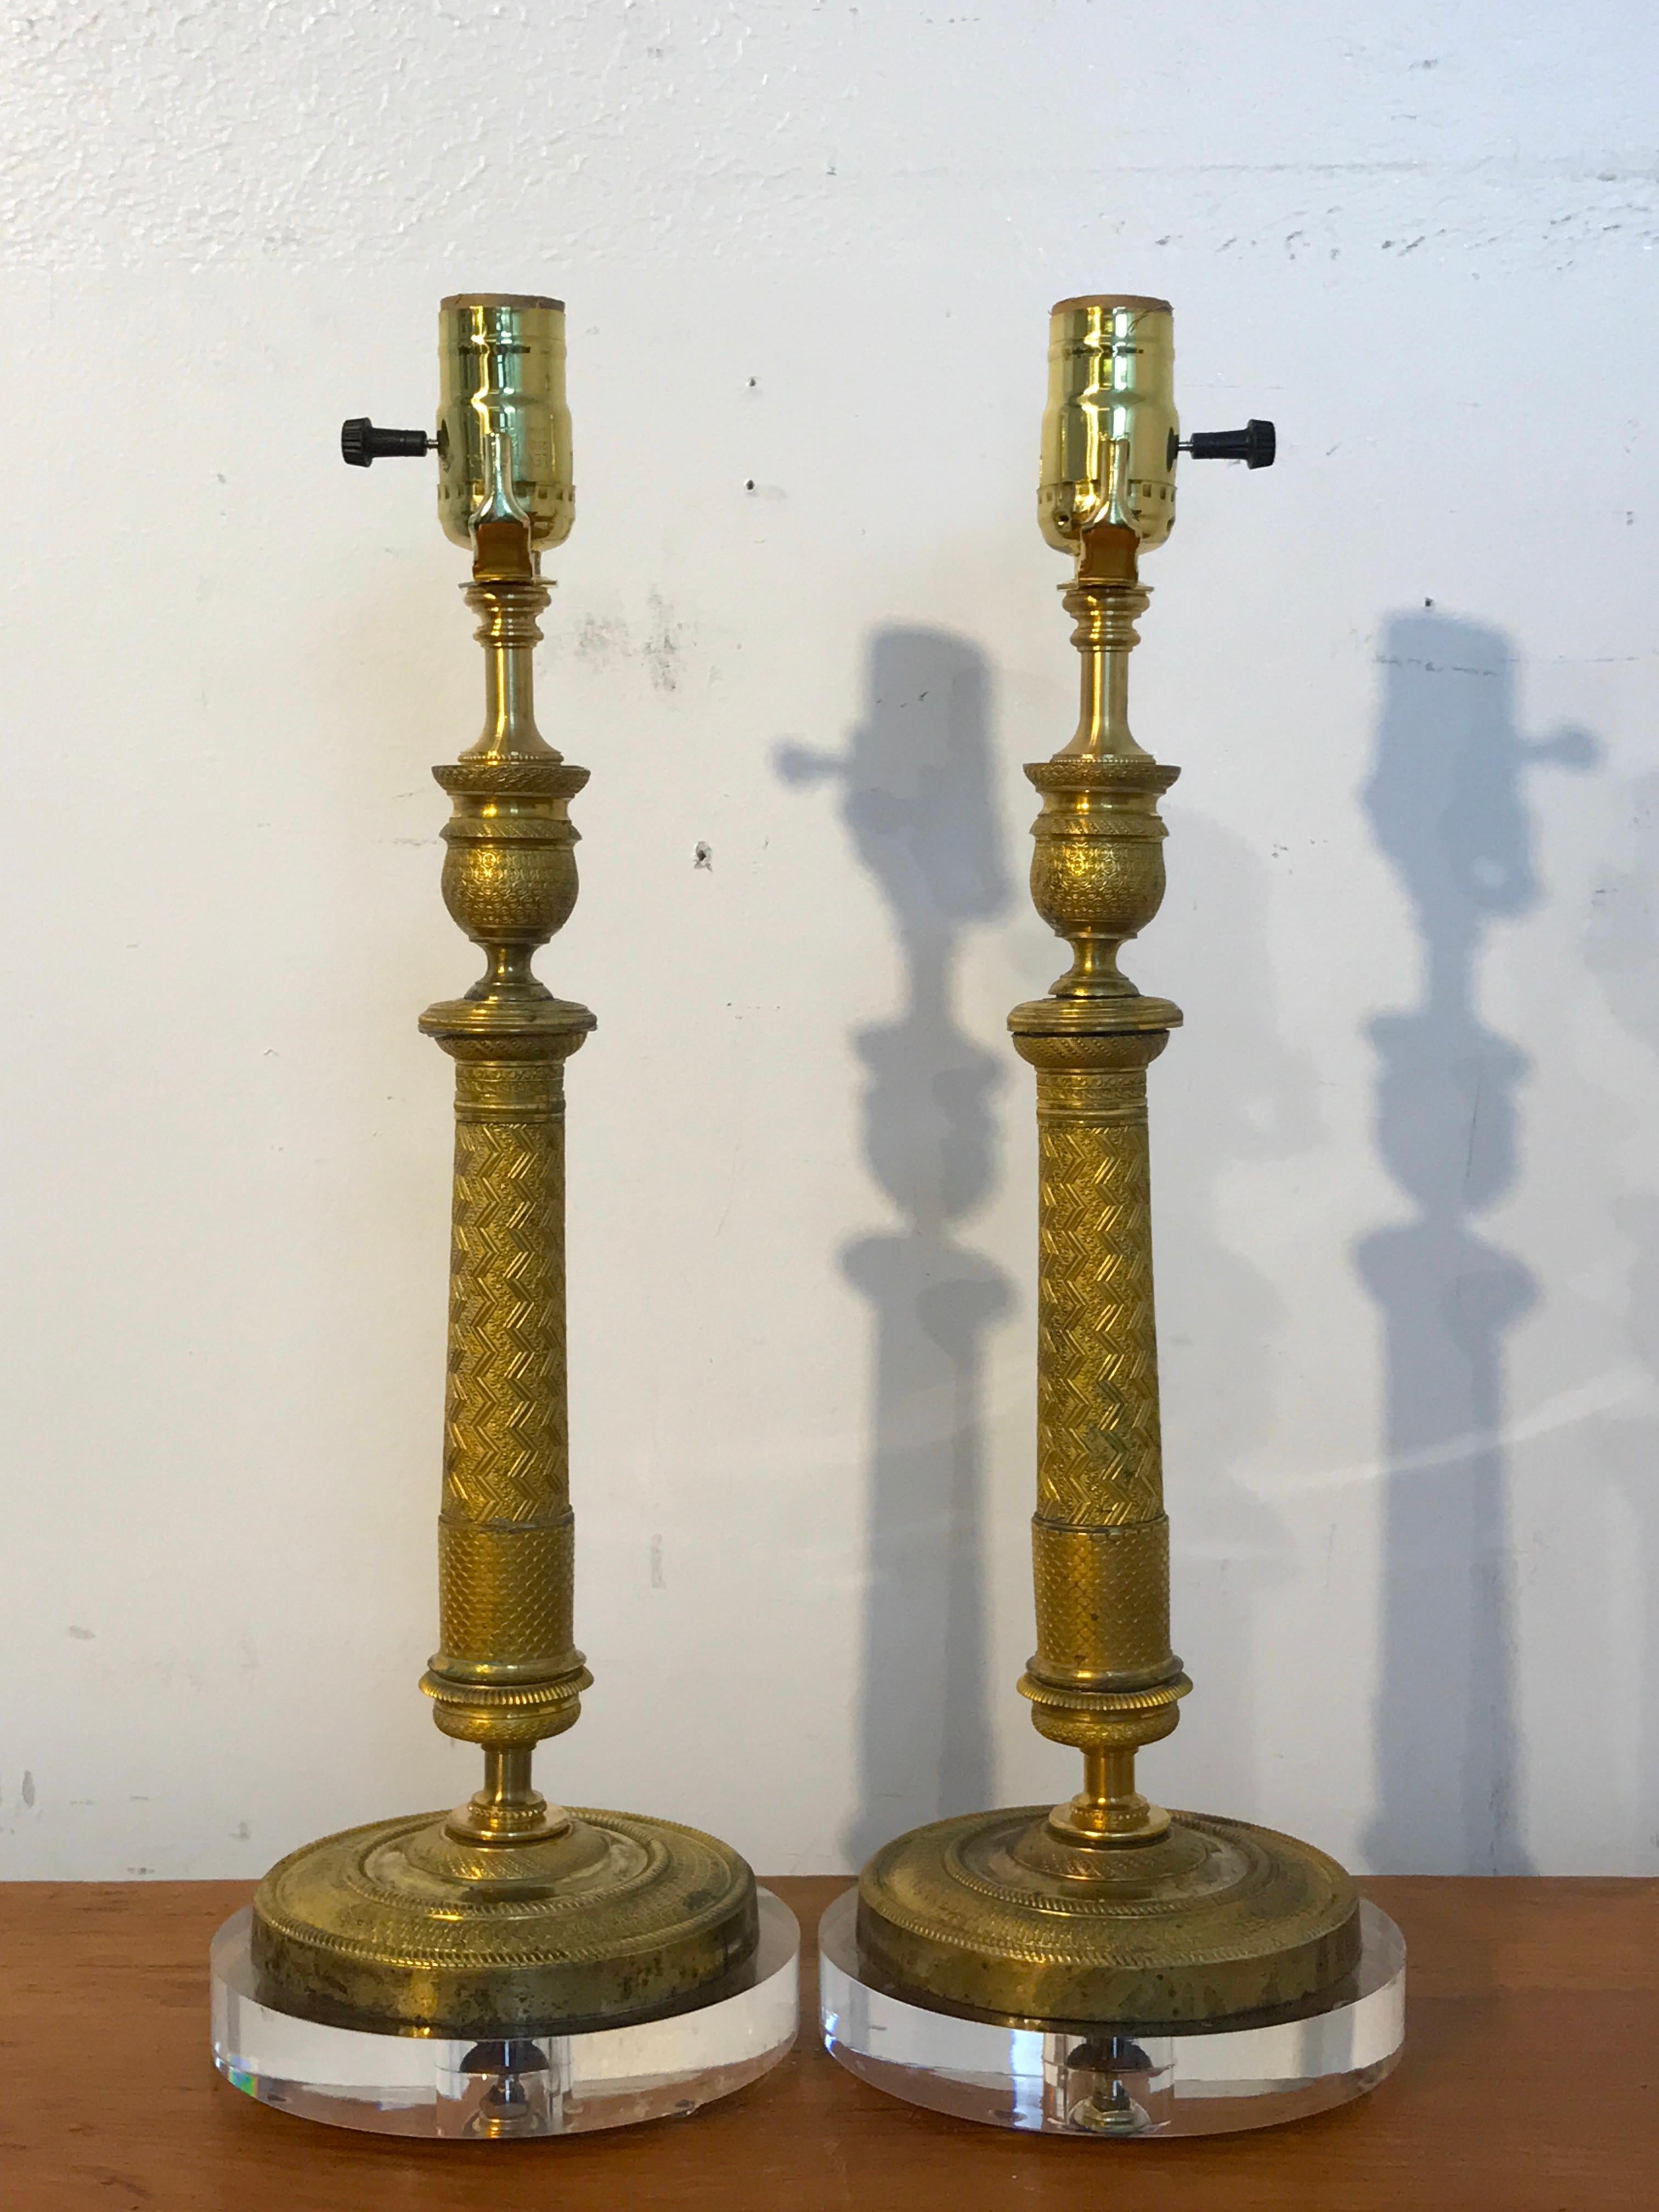 Pair of Charles X Ormolu candlesticks, now as lamps, each one with fine diagonal engine turning chasing, raised on a thick 6